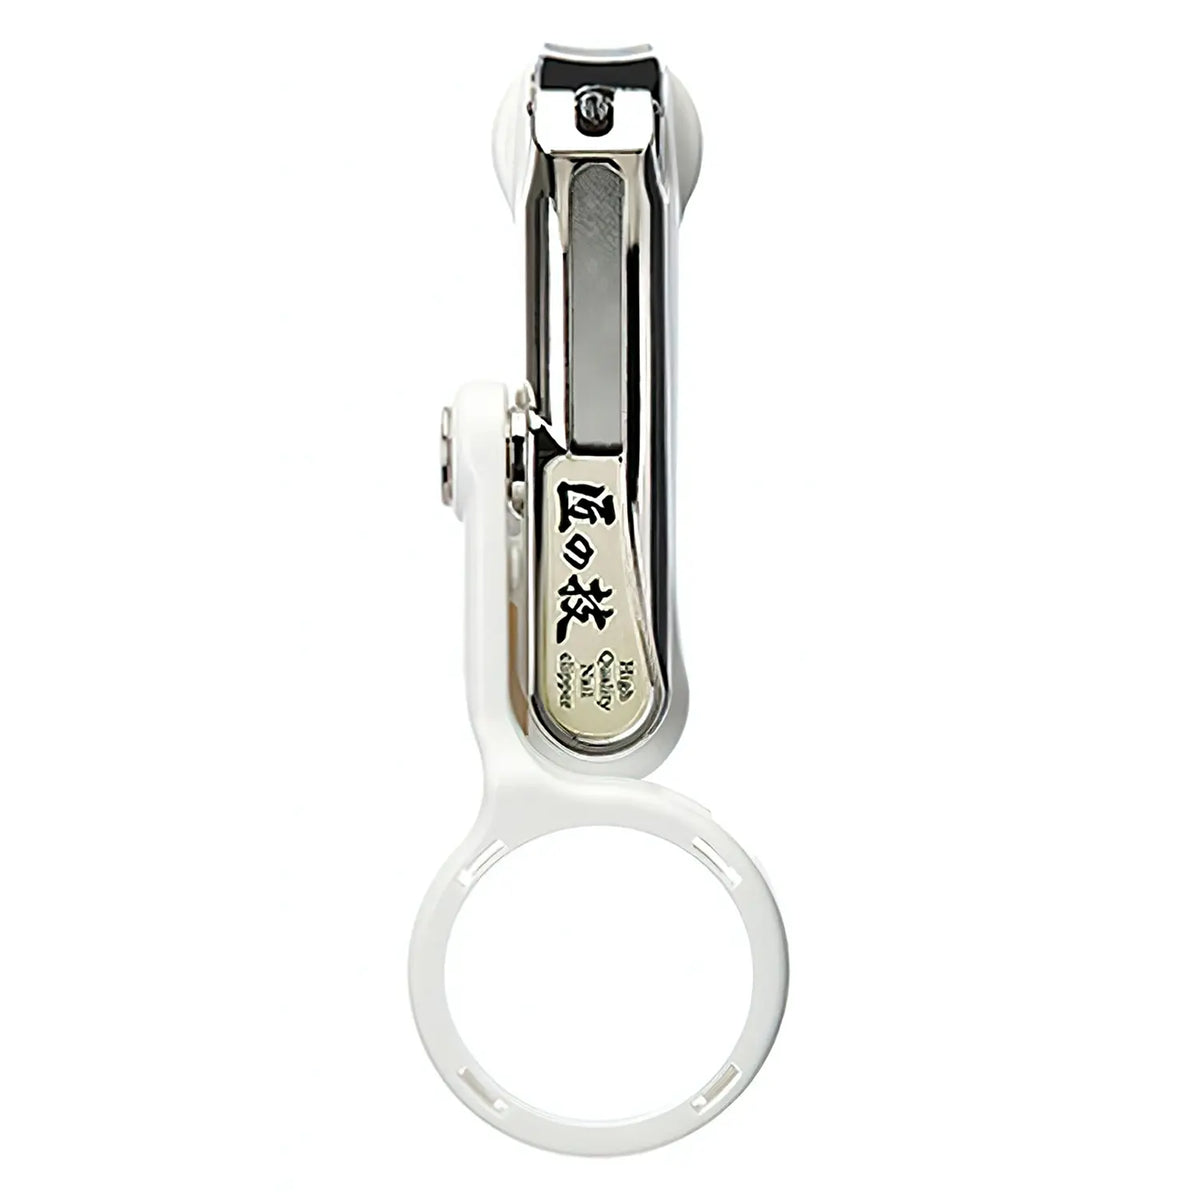 Green Bell Takuminowaza Carbon Steel Nail Clippers with Magnifier and Storage Bag